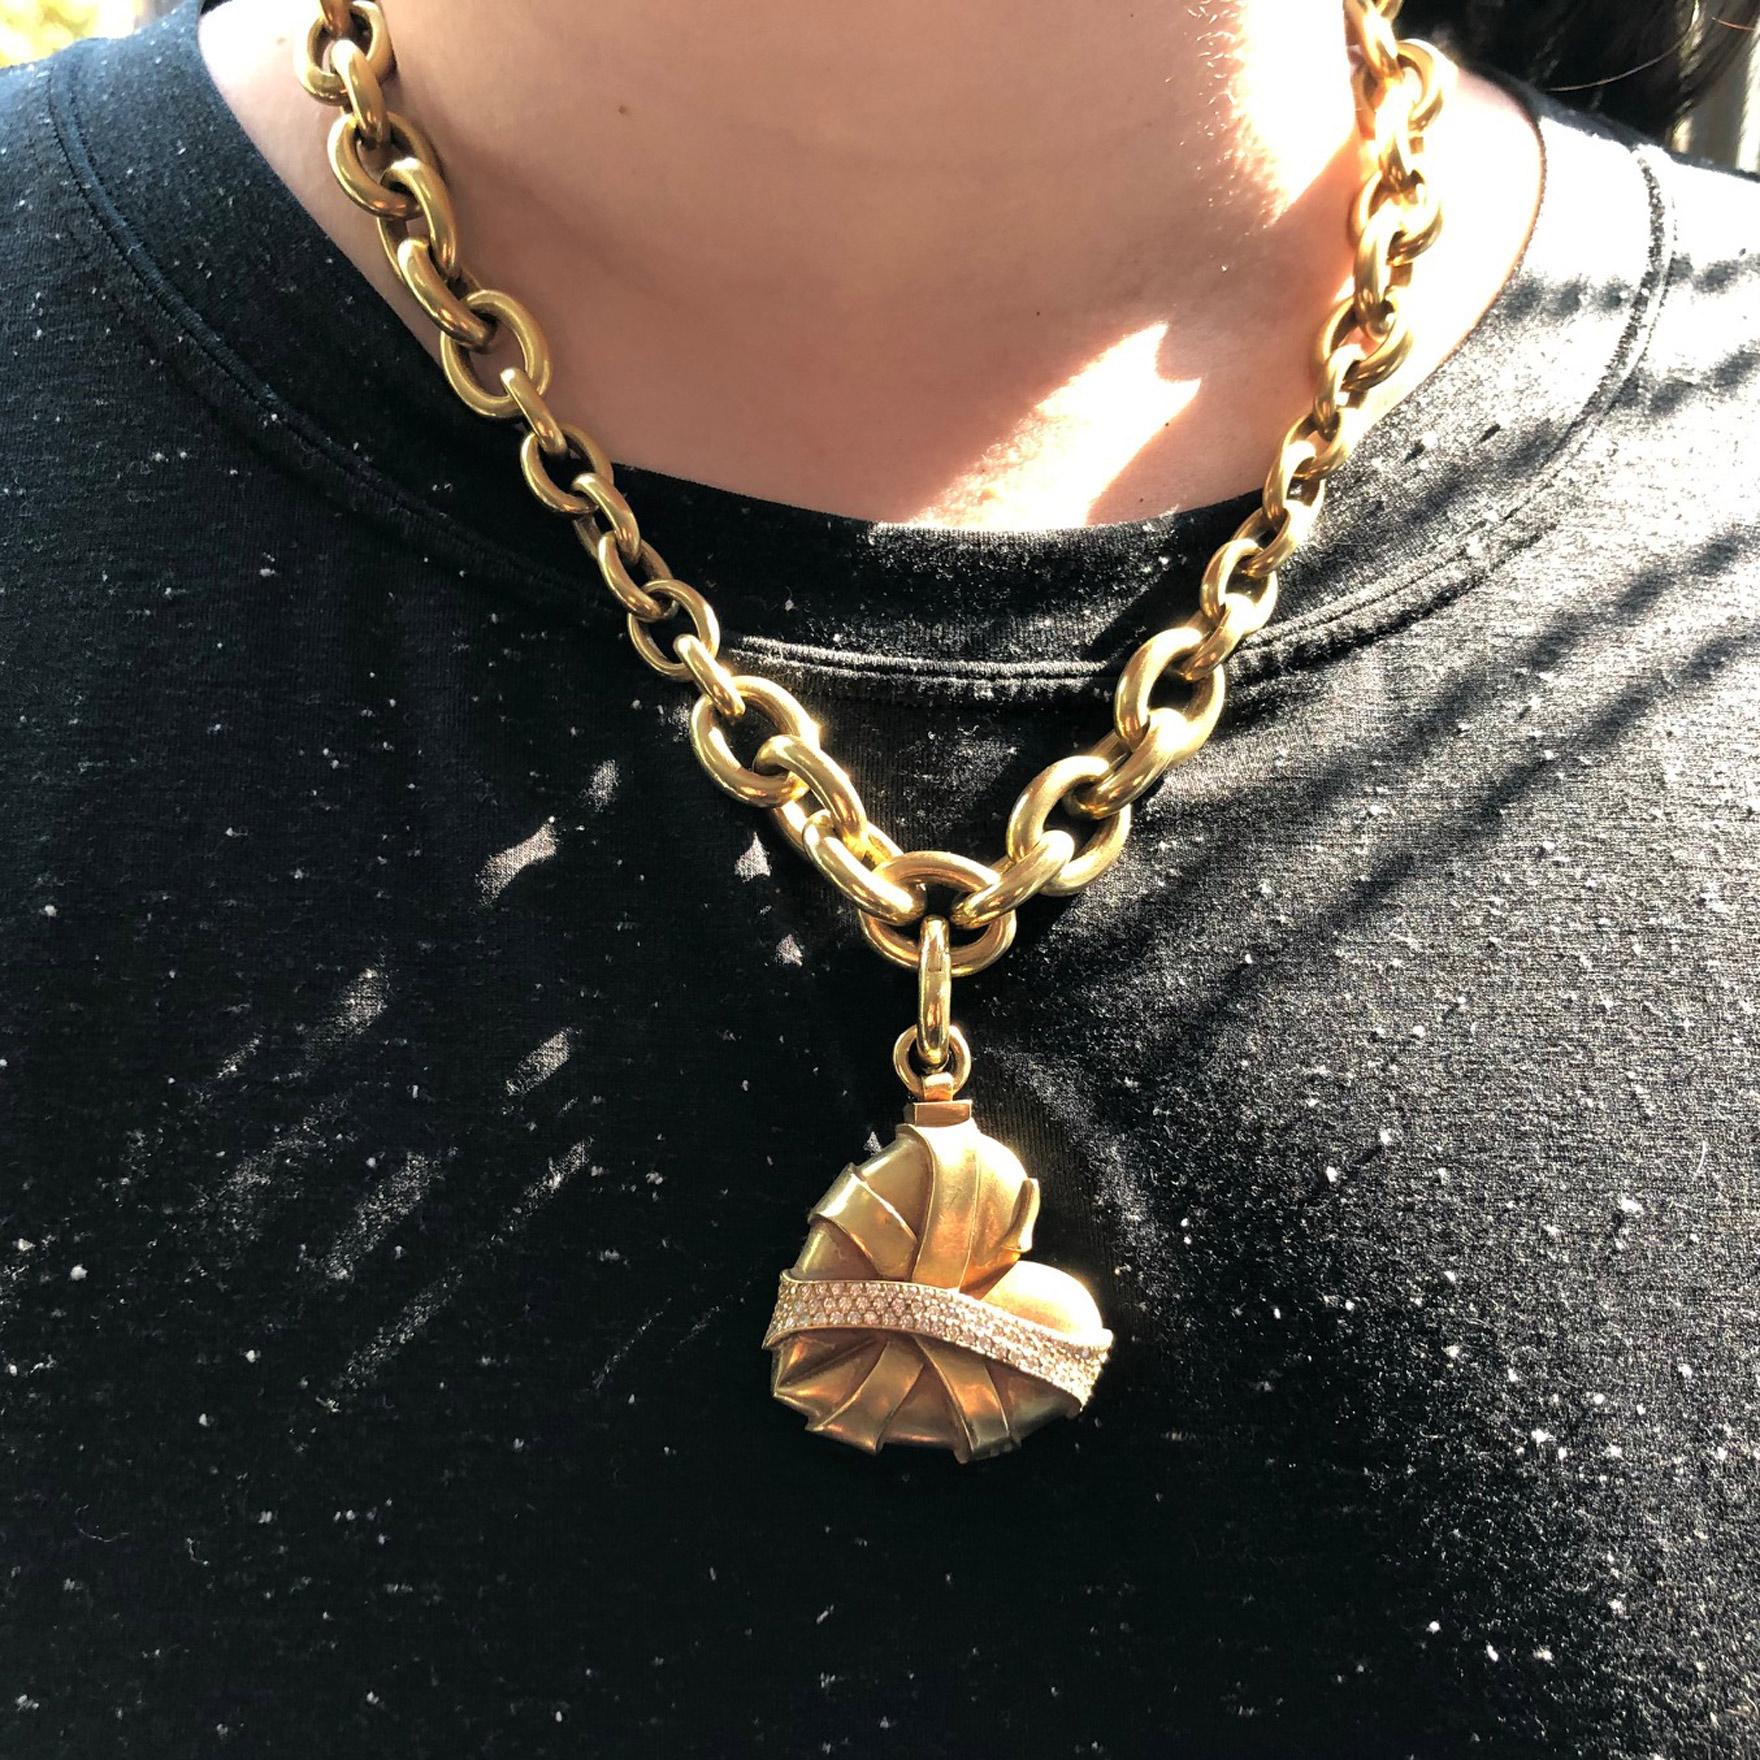 Known for his bold designs, choice of slightly greenish gold and heavy gold work, Barry Kieselstein-Cord has created this iconic heart chain necklace. The beautifully sculptured heart has 3 bands of gold crossing over it with the top one pave set